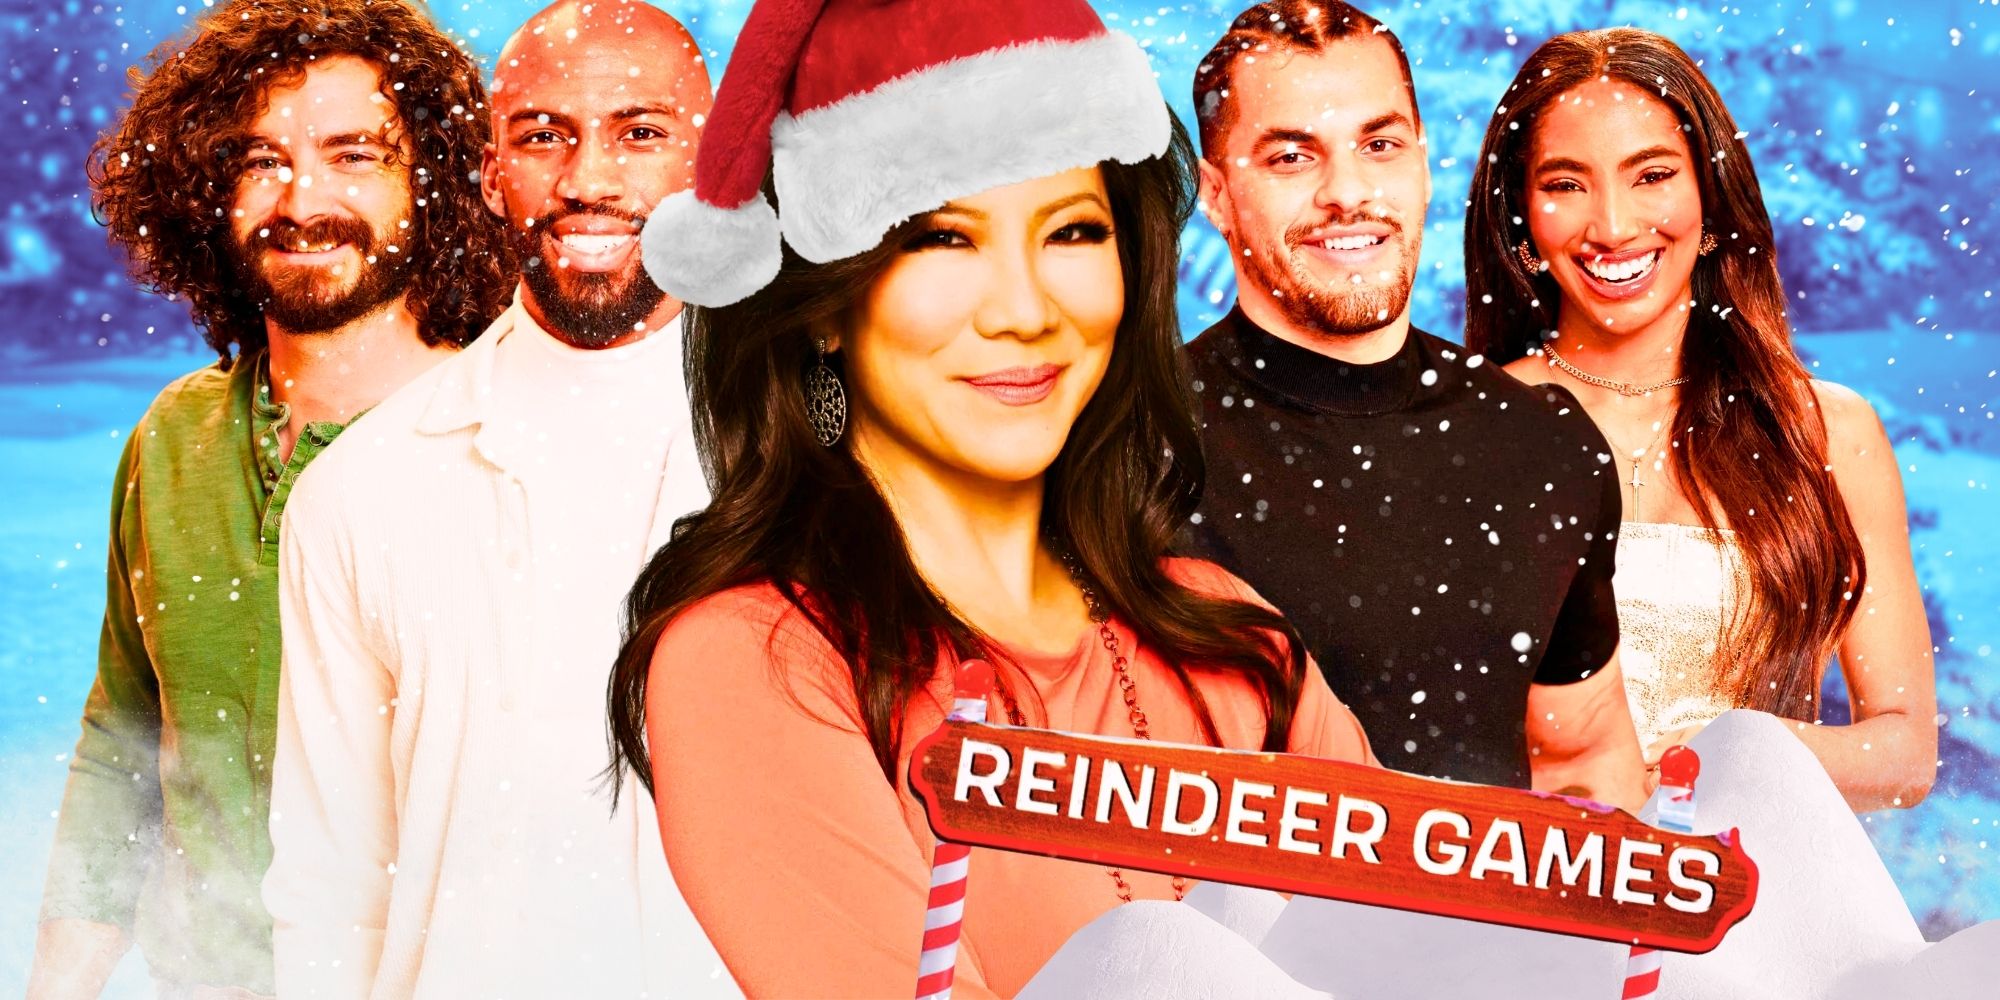 Who Is The Winner Of Big Brother Reindeer Games?